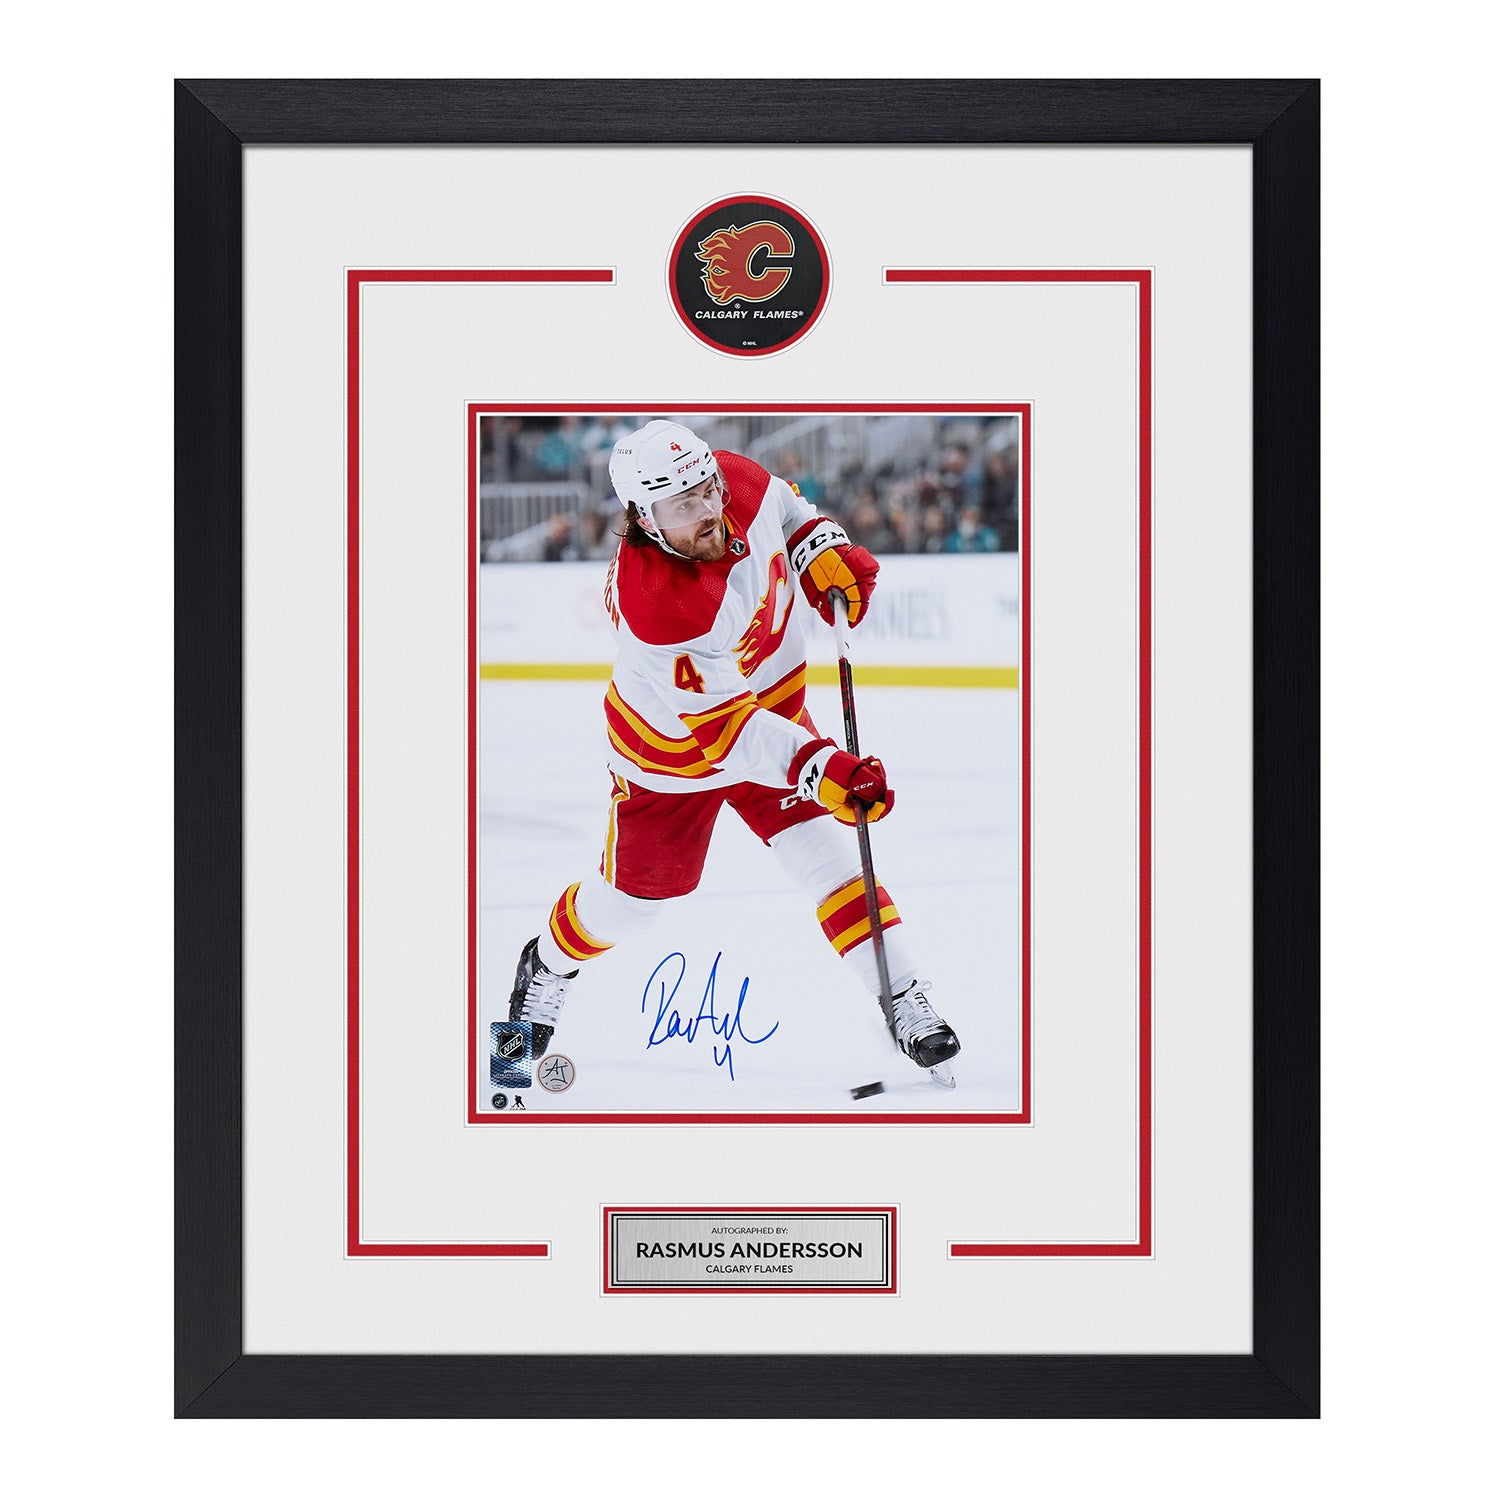 Rasmus Andersson Autographed Calgary Flames Puck Display 23x27 Frame